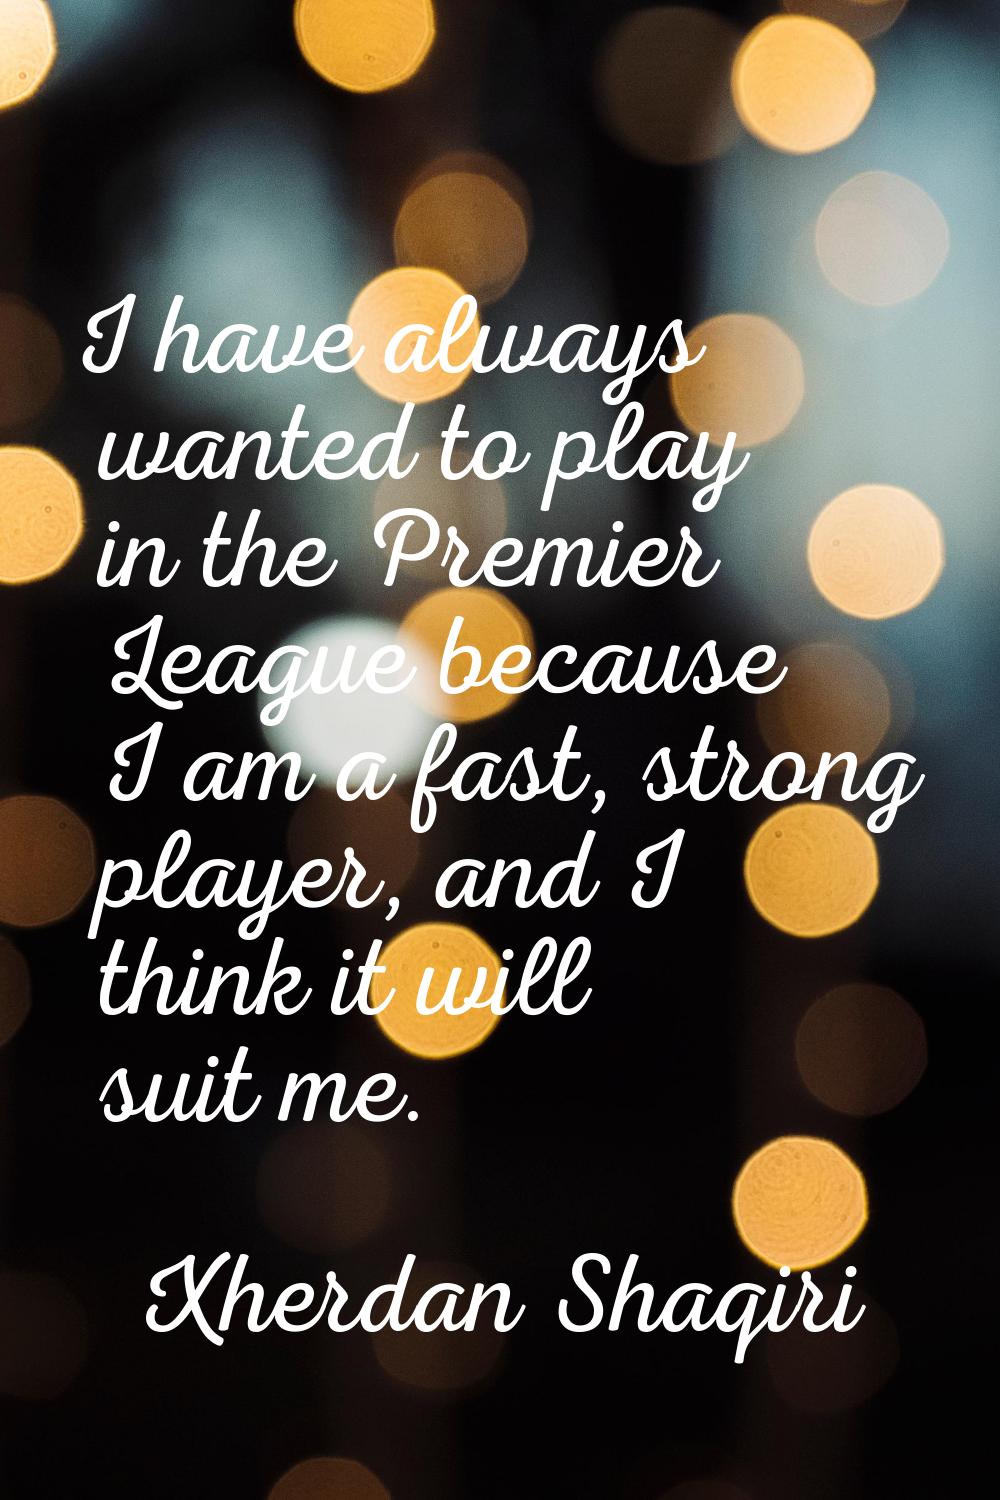 I have always wanted to play in the Premier League because I am a fast, strong player, and I think 